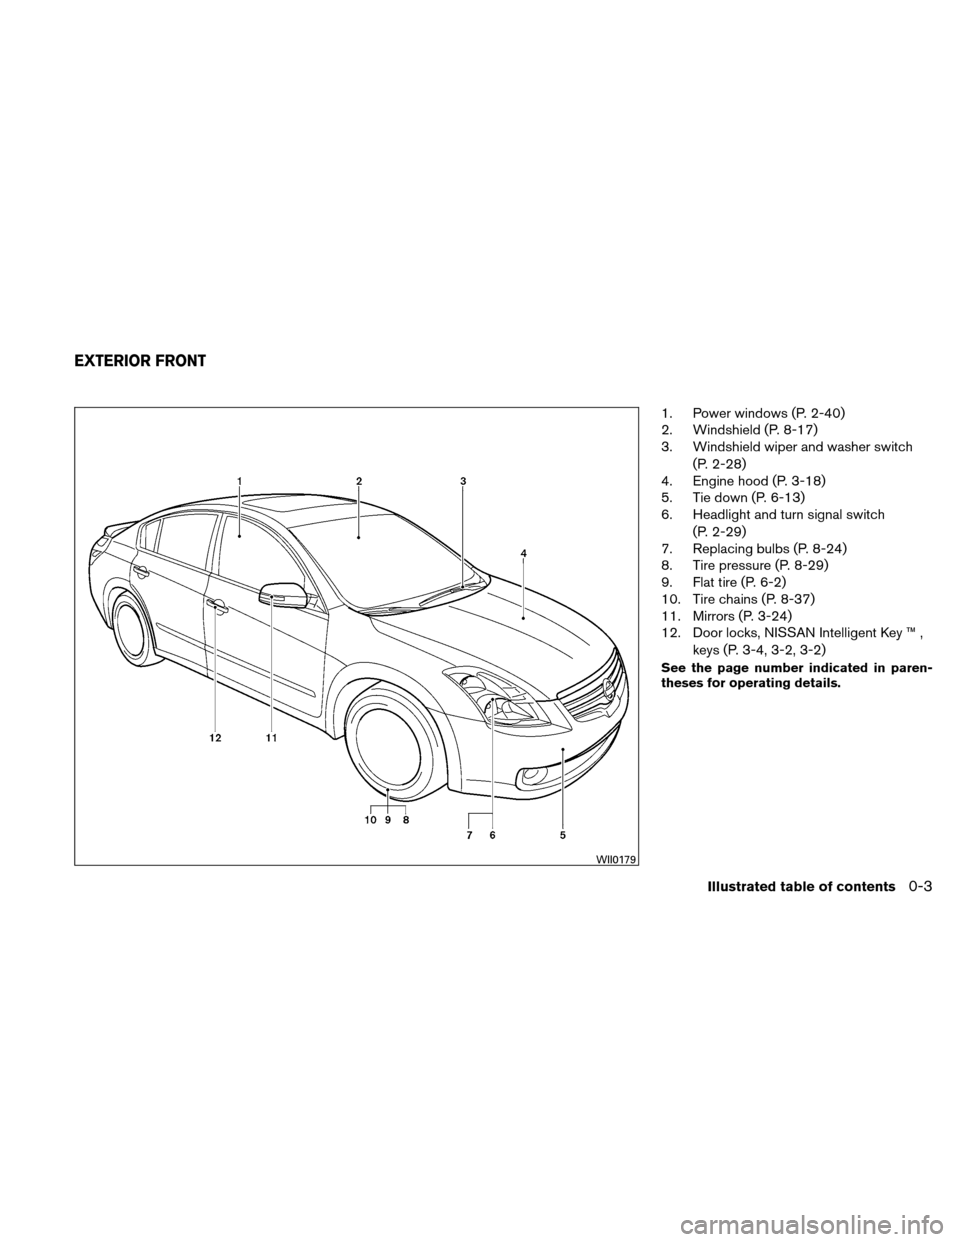 NISSAN ALTIMA HYBRID 2010 L32A / 4.G Owners Manual 1. Power windows (P. 2-40)
2. Windshield (P. 8-17)
3. Windshield wiper and washer switch(P. 2-28)
4. Engine hood (P. 3-18)
5. Tie down (P. 6-13)
6. Headlight and turn signal switch
(P. 2-29)
7. Replac